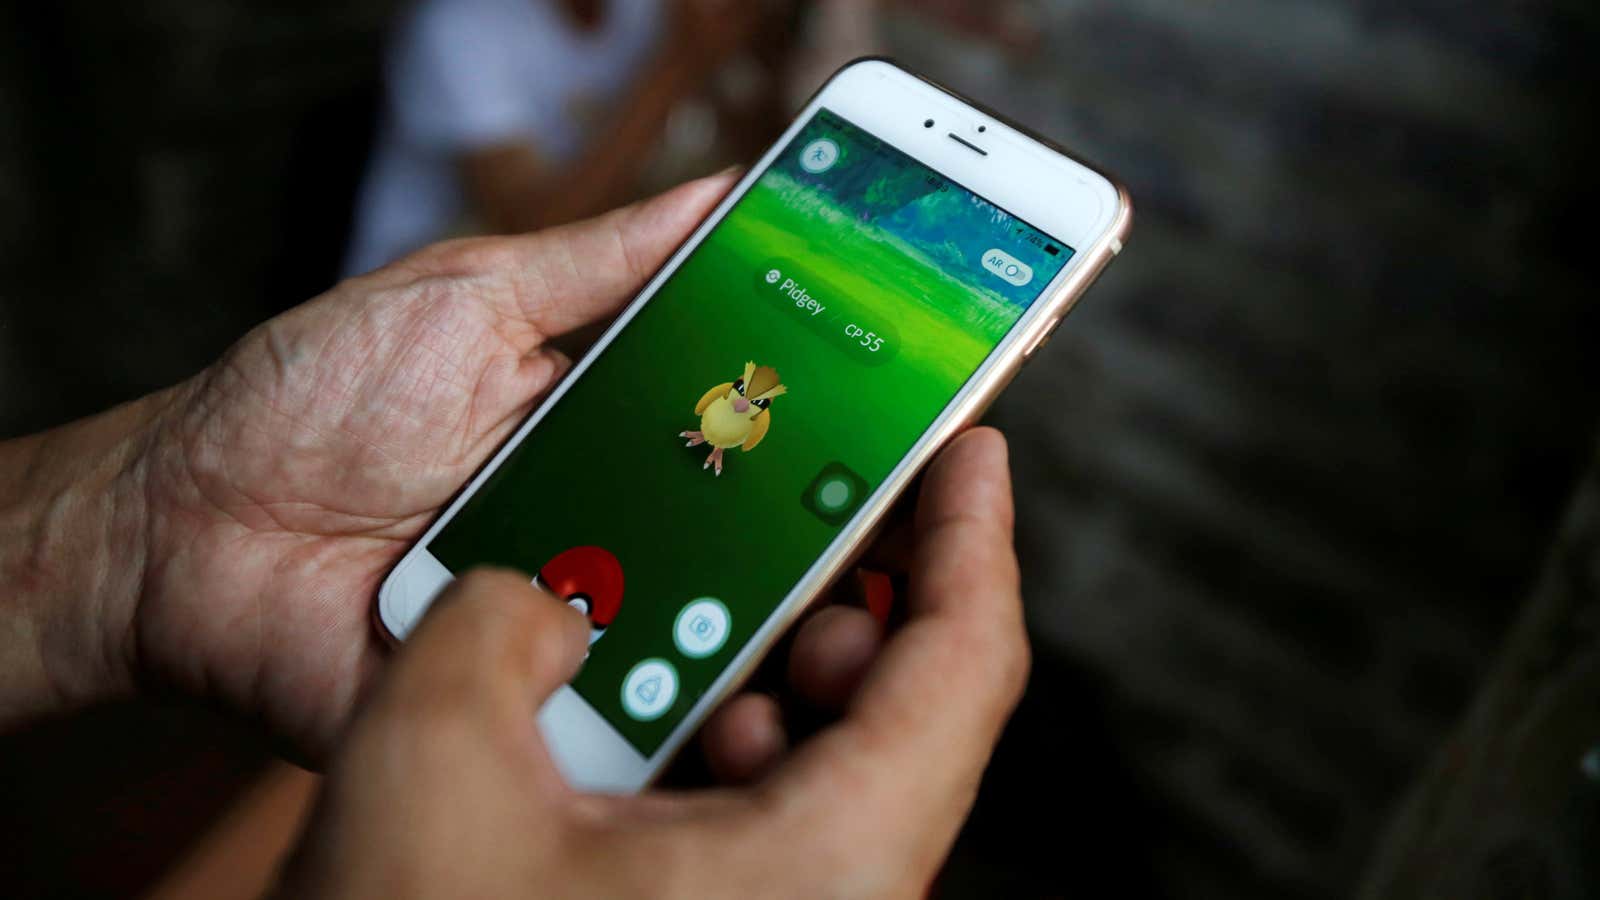 Social workers recommend Pokémon Go in Spain to enhance exercise and social inclusion.